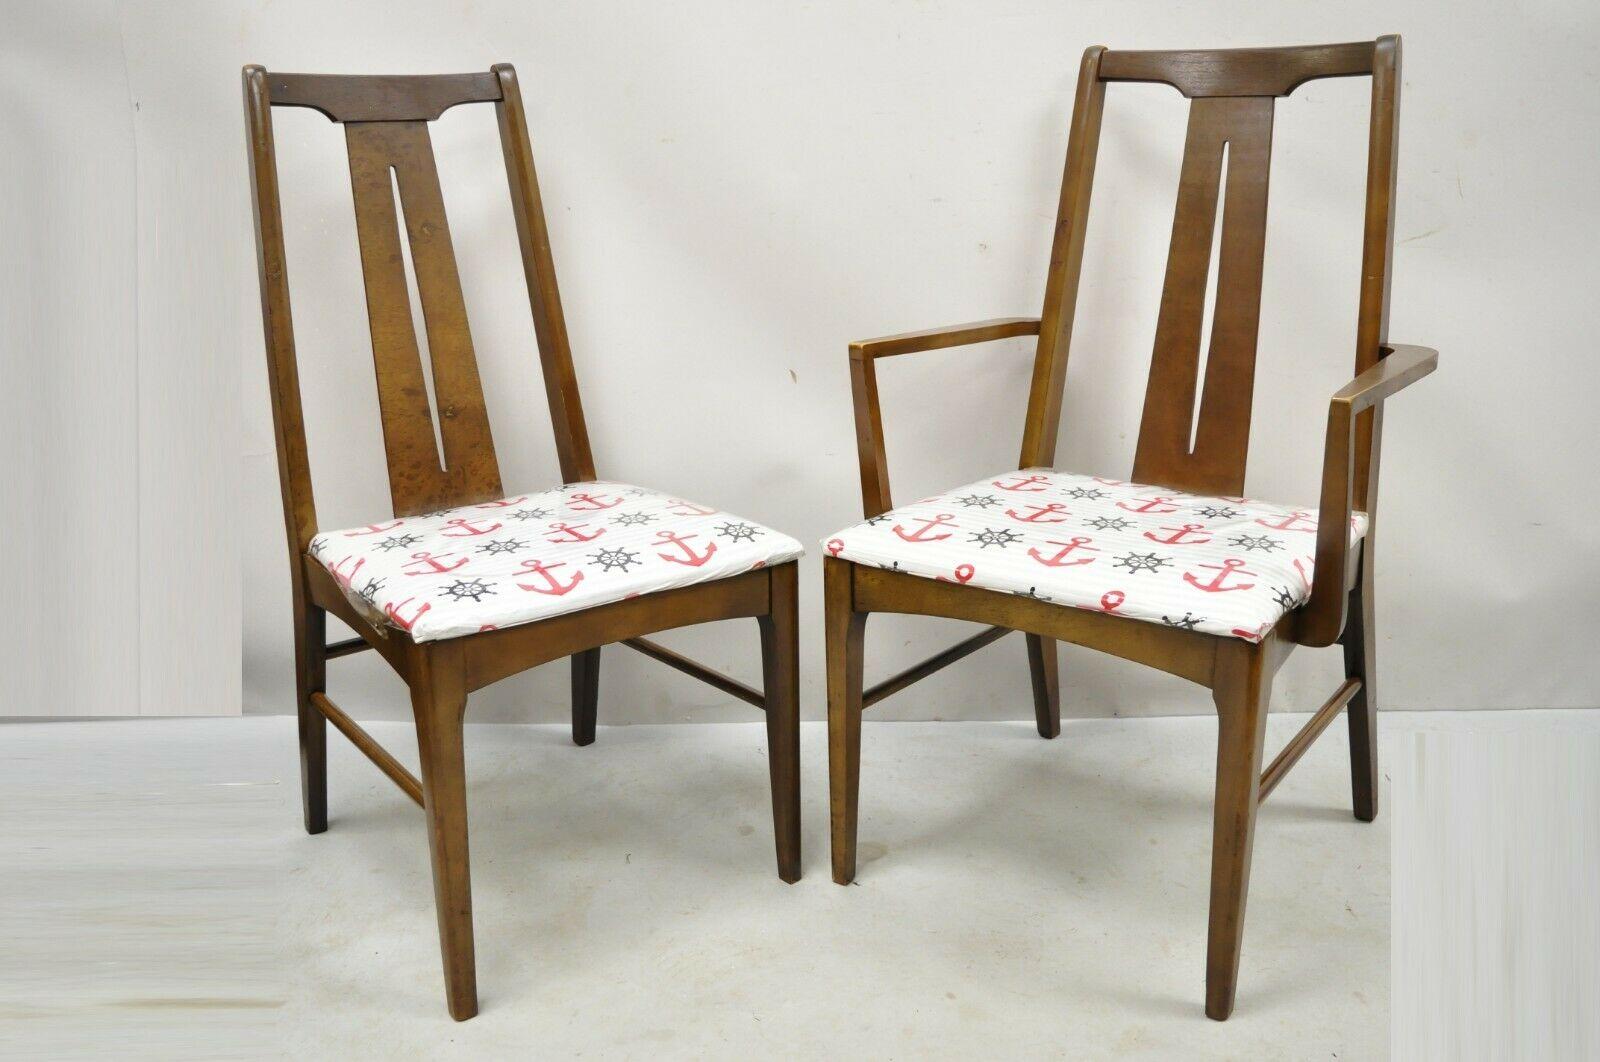 Vintage Mid Century Modern Walnut Dining Room Chairs - Set of 6 For Sale 7